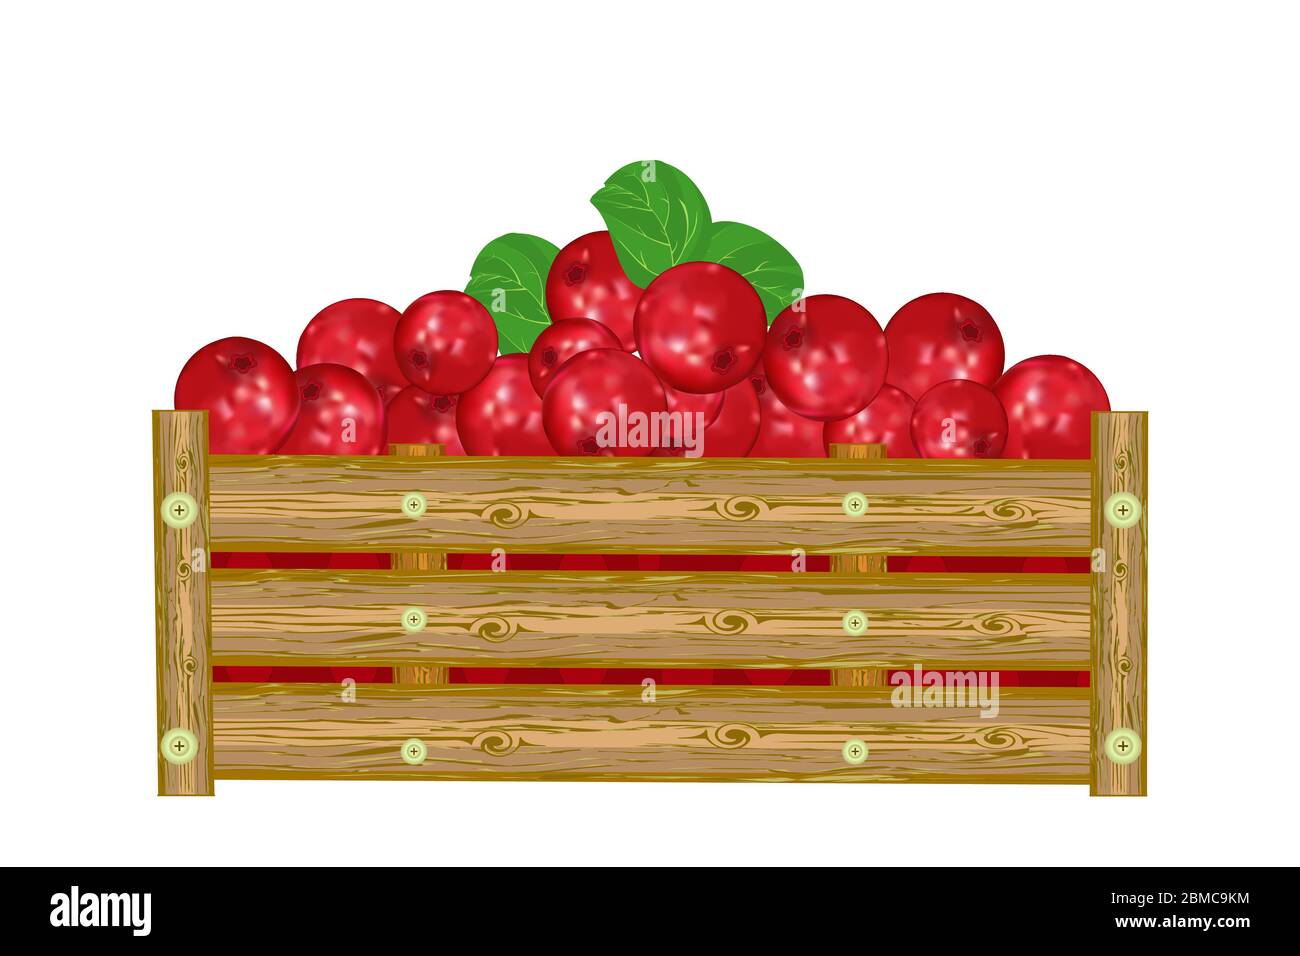 Lingonberry in box isolated on white background. Crate of juicy lingonberry. Eco farm, market, transportation. Label, package, banner, icon. Vector Stock Vector